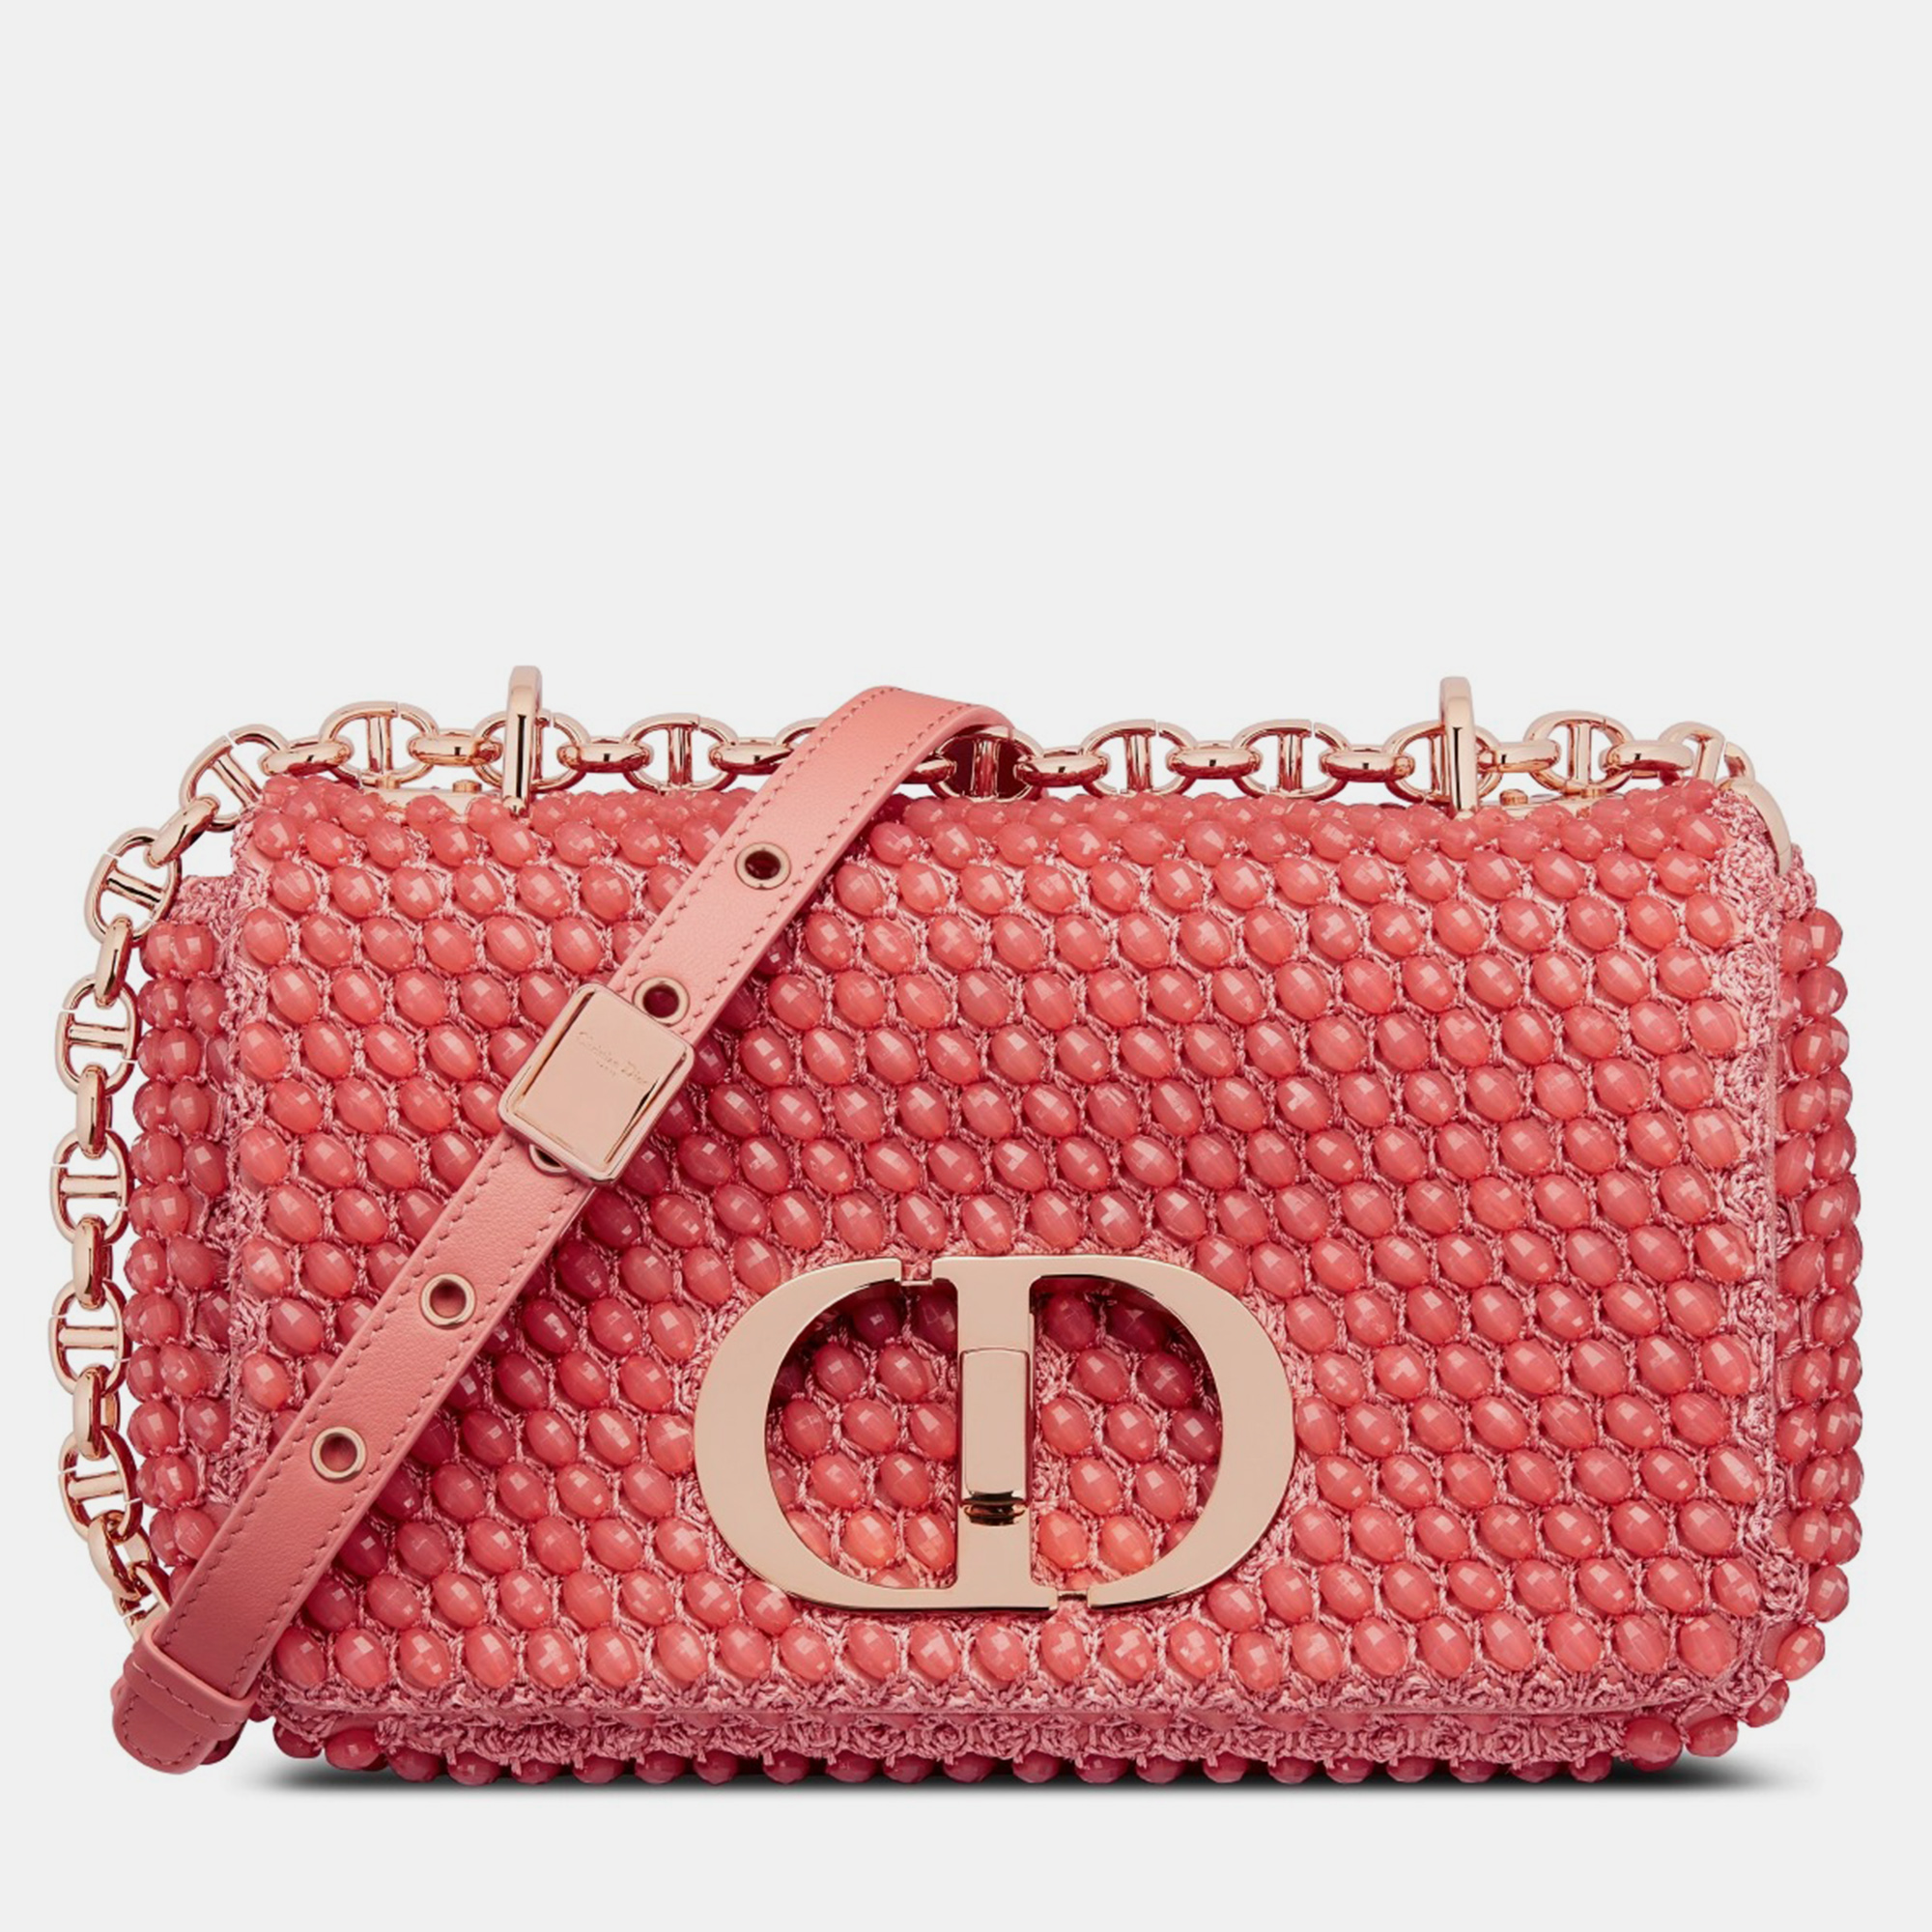 Elevate your style with an exquisite Dior bag. This timeless masterpiece is crafted from high grade materials adorned with the iconic Dior motifs and features meticulous craftsmanship for luxury and sophistication.